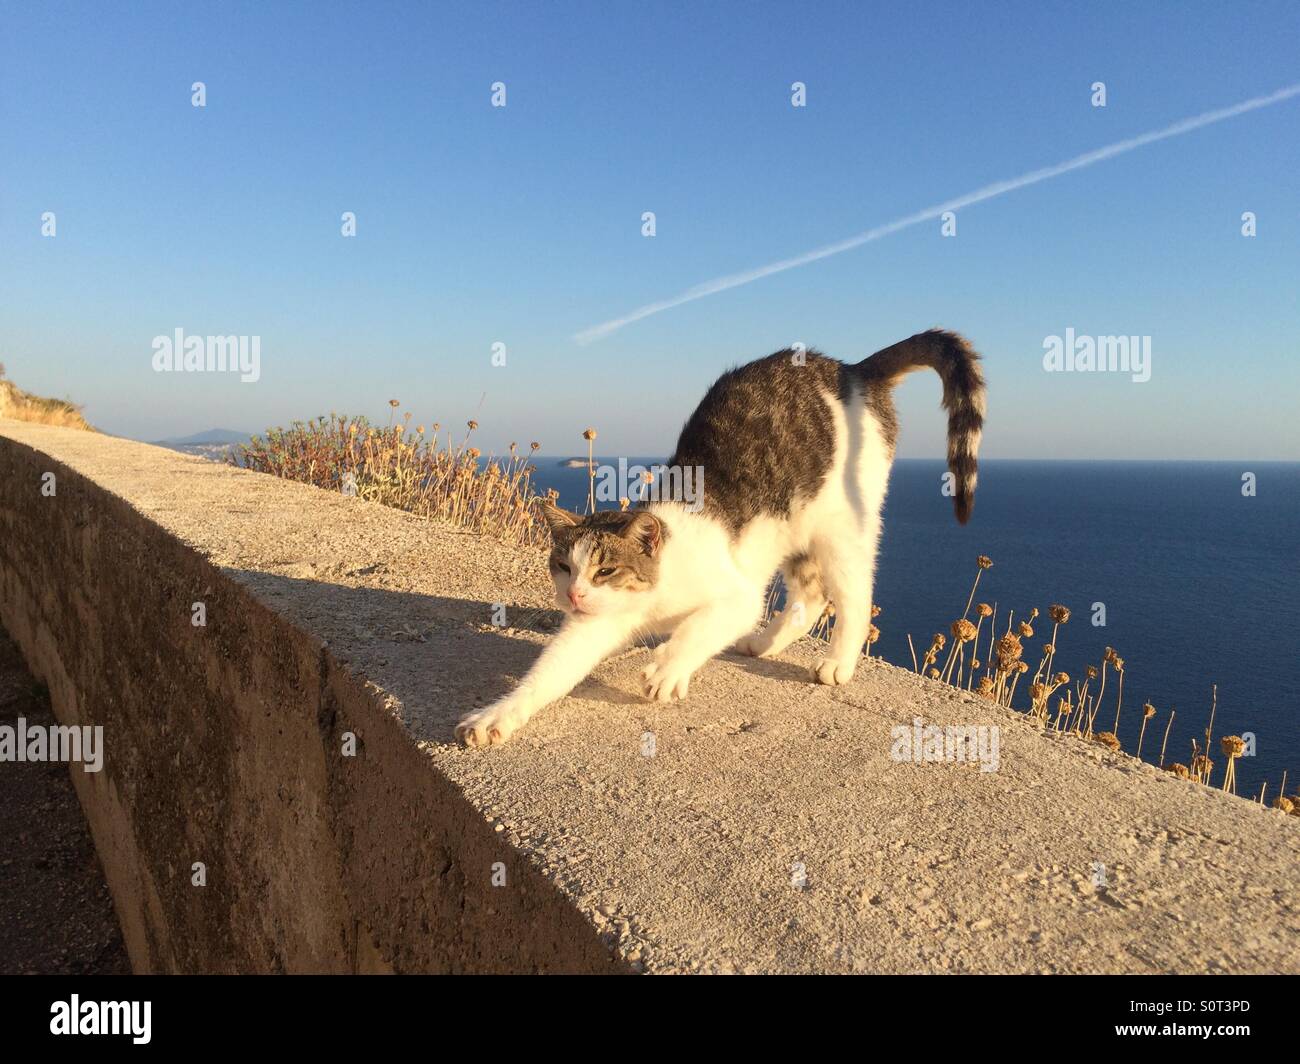 Cat stretching on mountain edge Dubrovnik Stock Photo